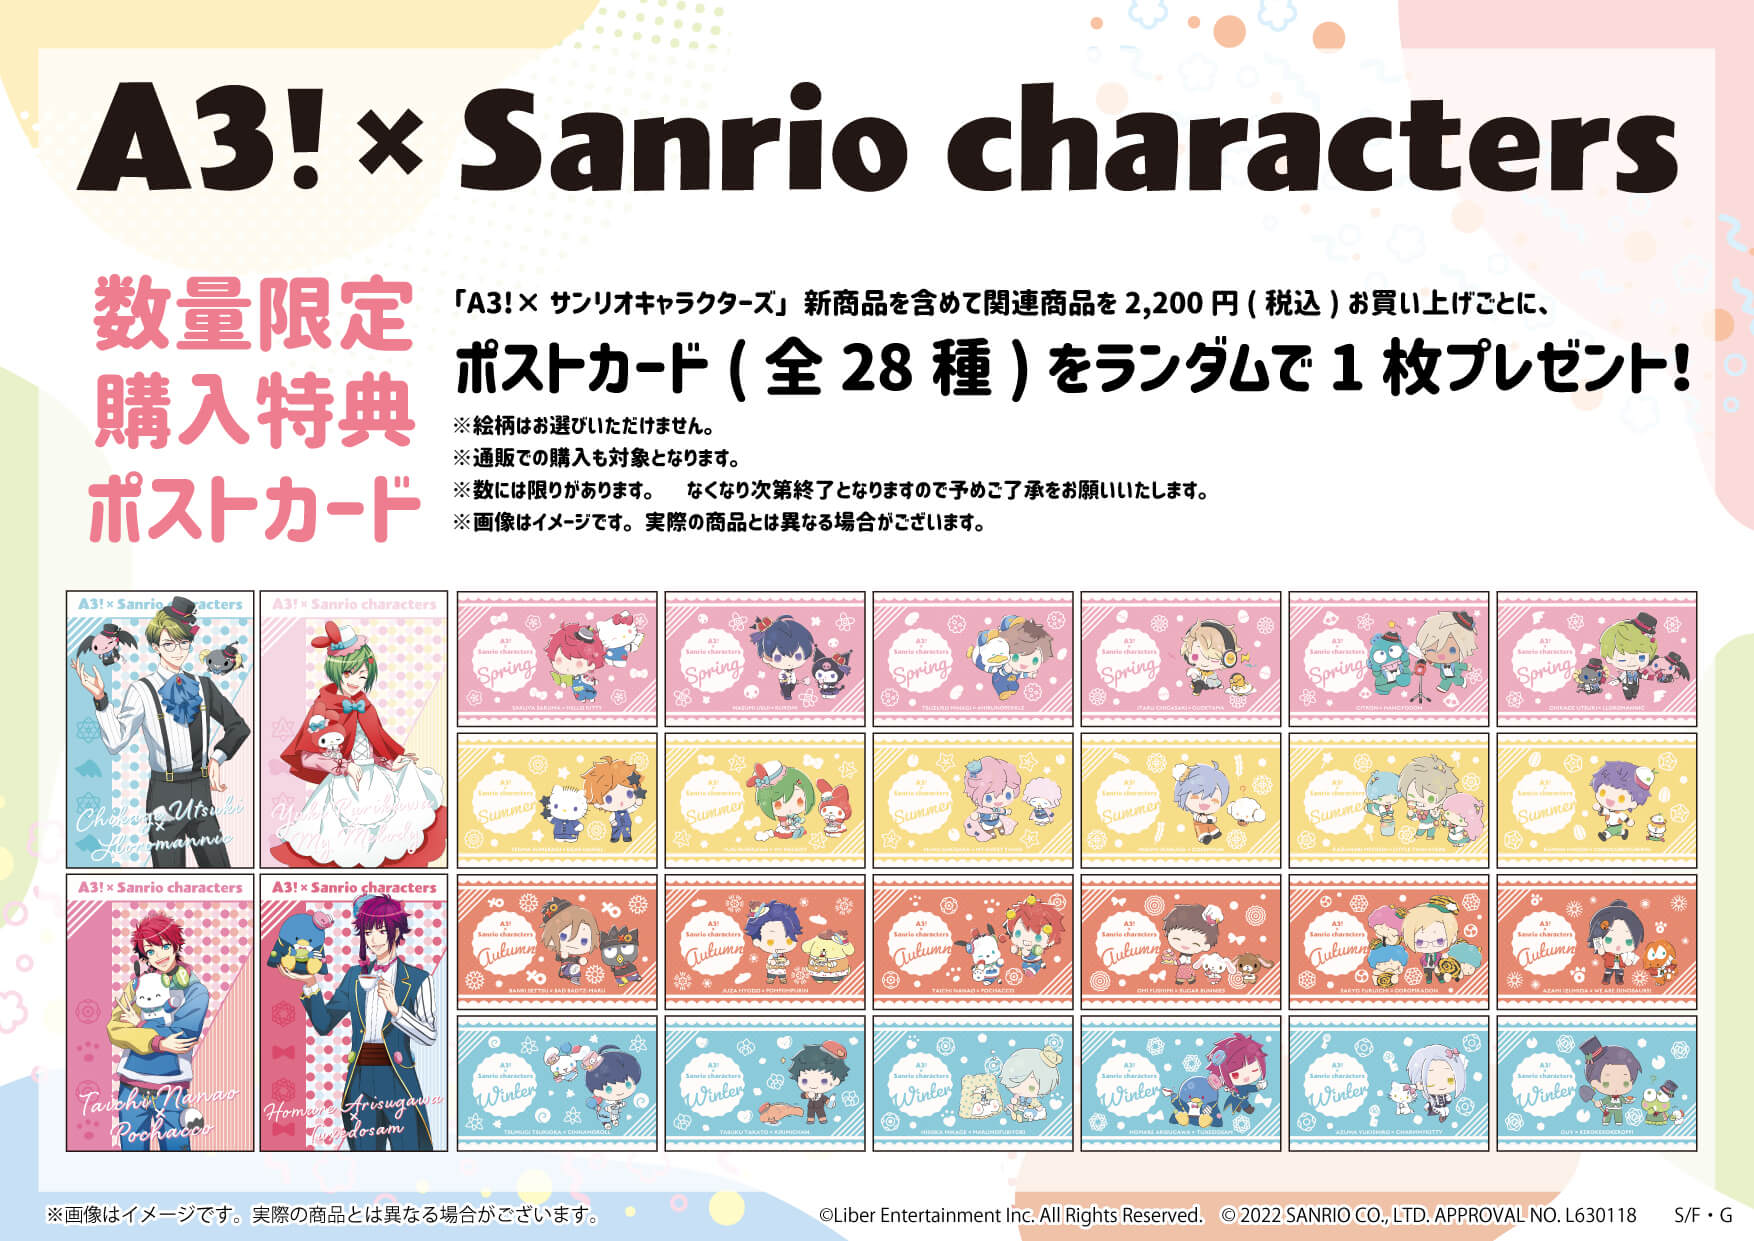 A3! × Sanrio characters